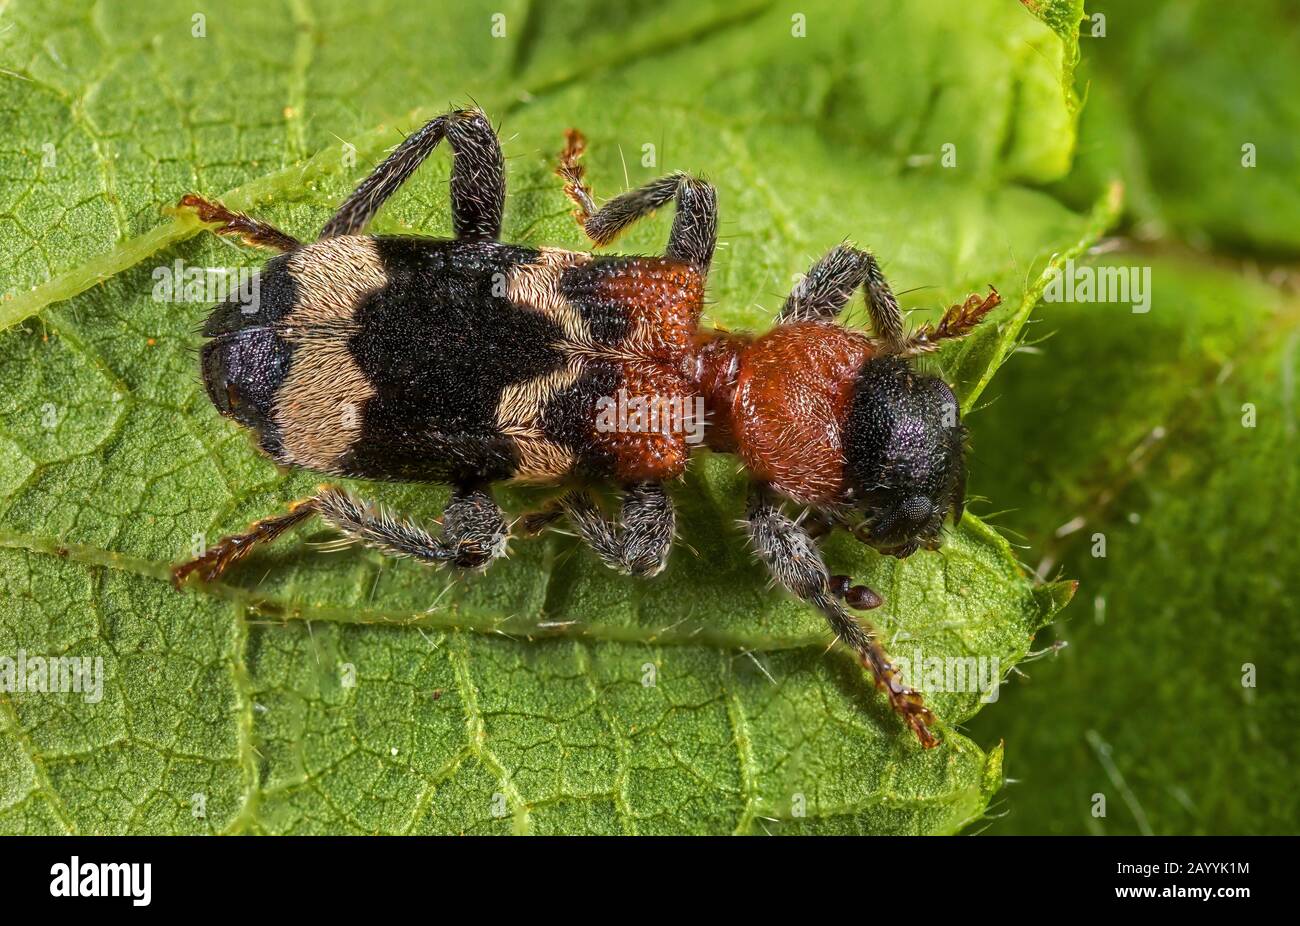 Ant beetle, European Red-bellied Clerid (Thanasimus formicarius), sitting on a leaf, view from above, Germany Stock Photo